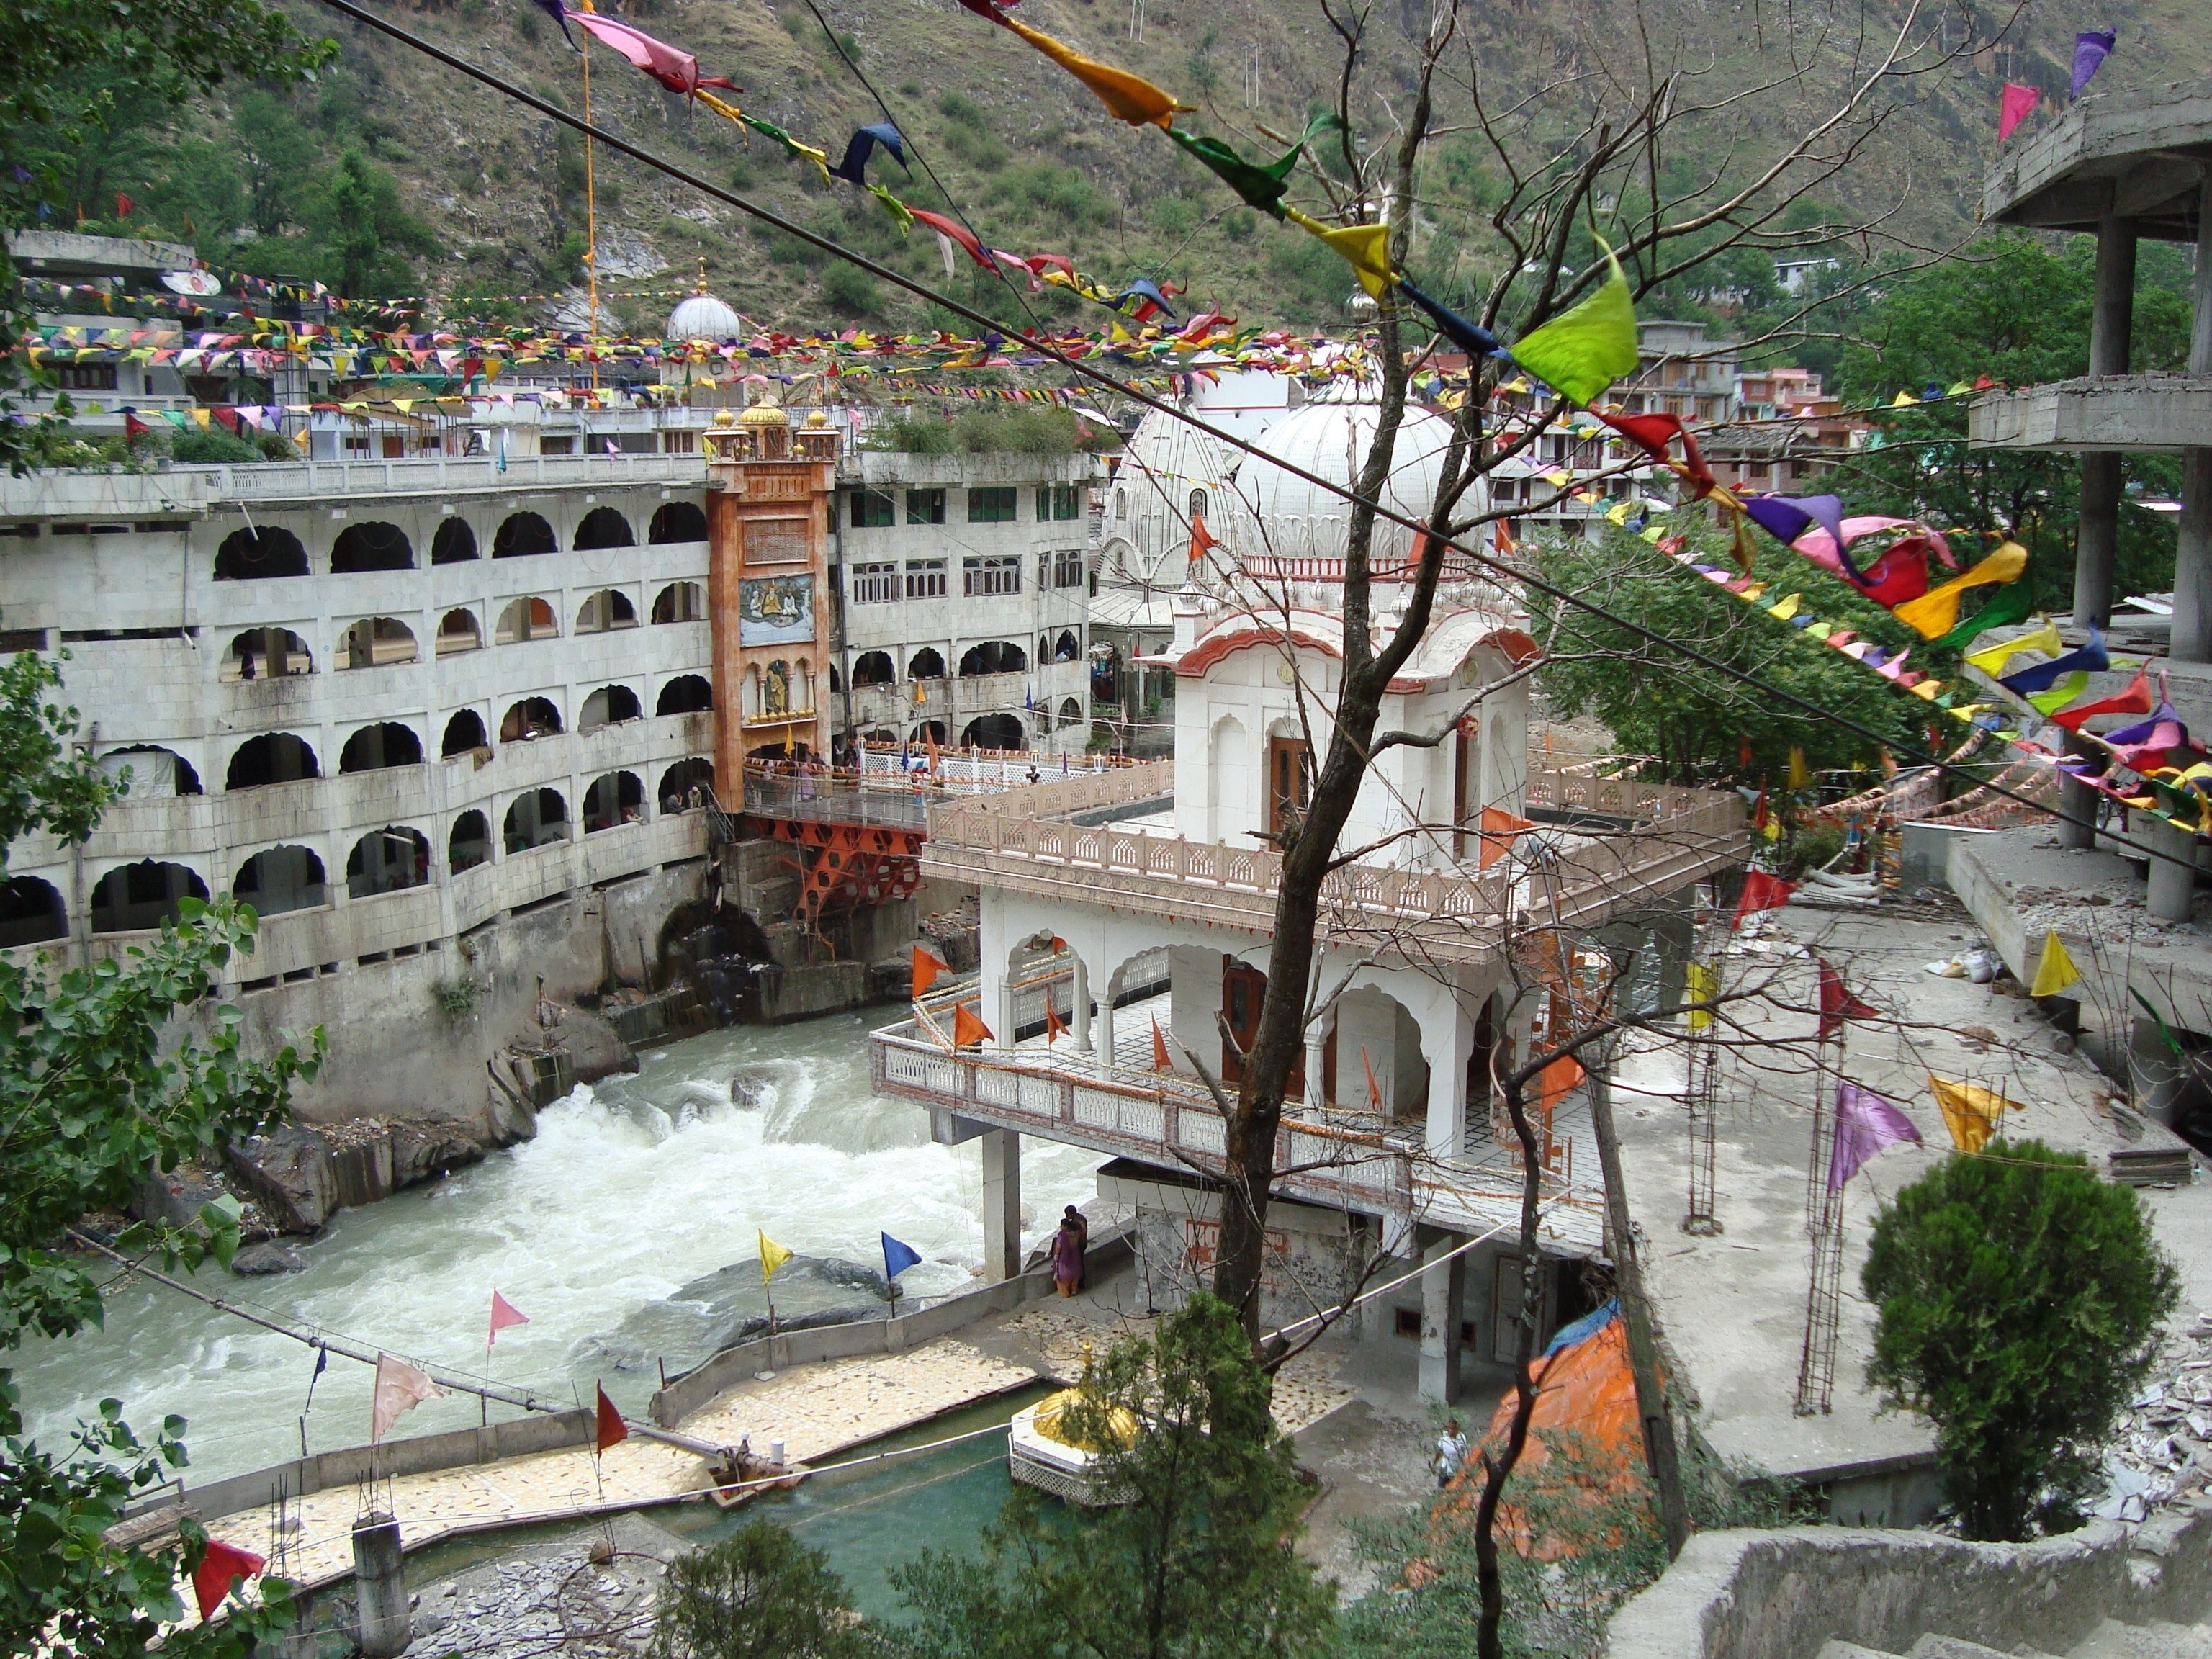 Hot Water Springs and Manikaran Sahib Gurudwara  - The place is located at an altitude of 1760m  with natural hot water springs and beautiful landscapes. The water is so hot that rice for the “langar” (food in Gurudwara) is cooked by putting it in a linen-bag and dipping it into the boiling water.

#troveron #kullu #incredibleindia #manikaran 